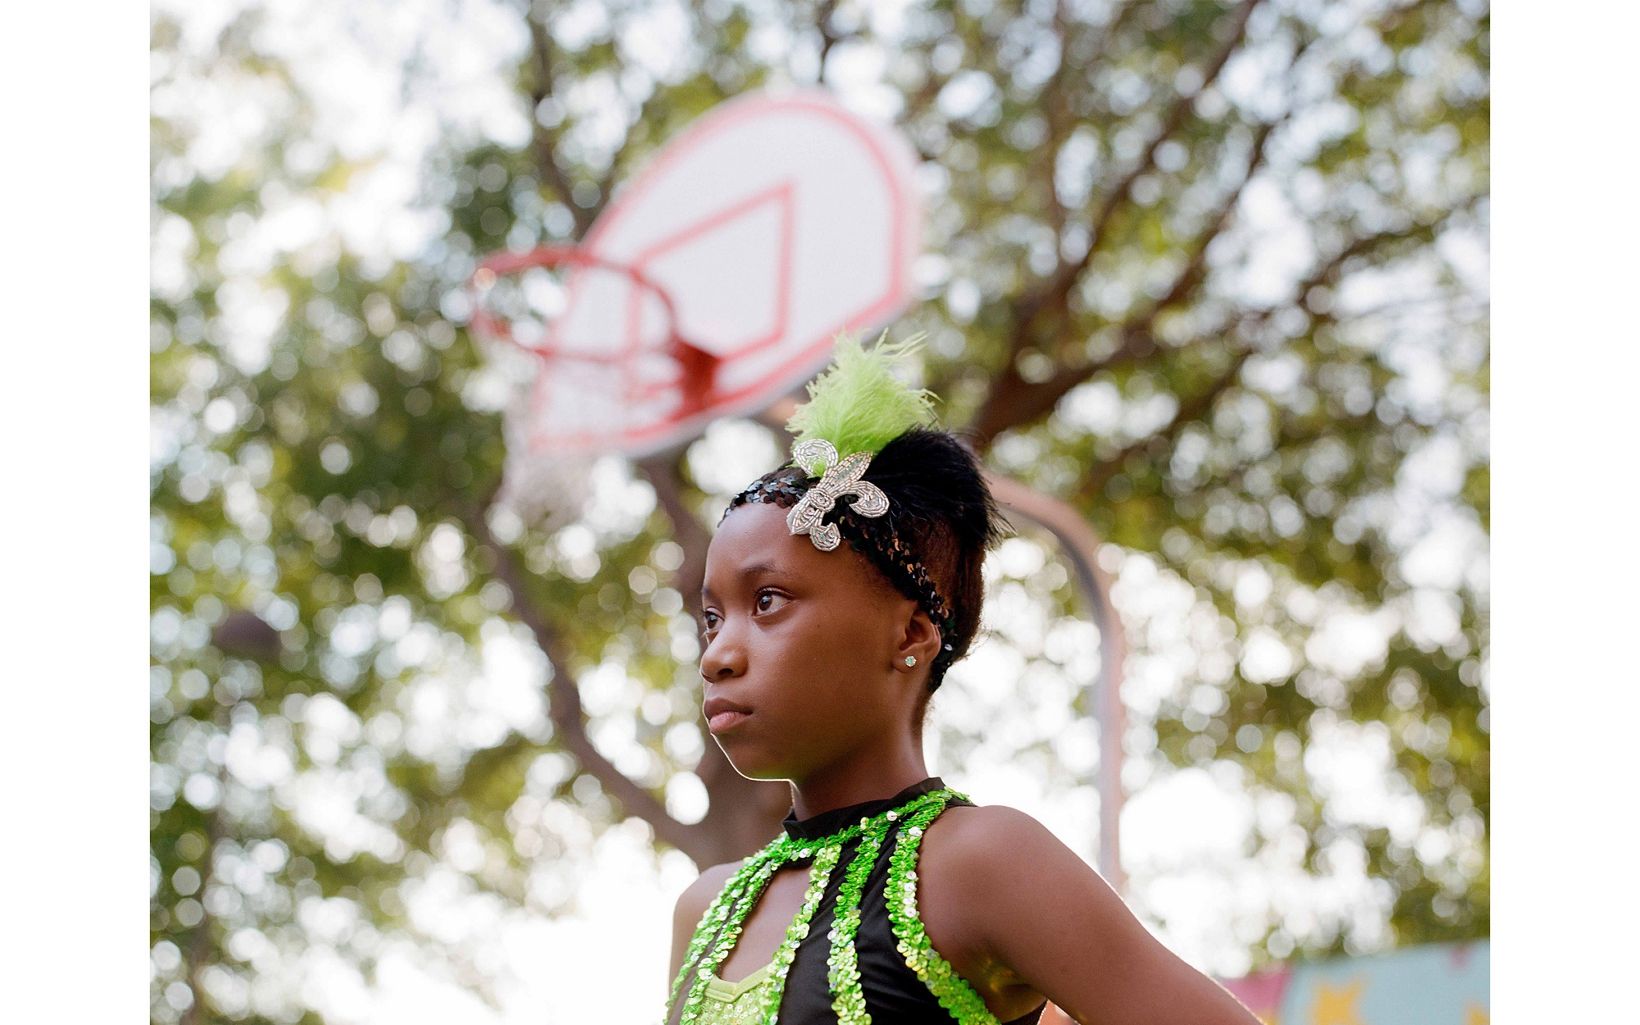 A young girl poses for a portrait. she is wearing a green and black dance leotard and an embellished headband and she stares into the distance left of the frame. A baseketball net is in background.